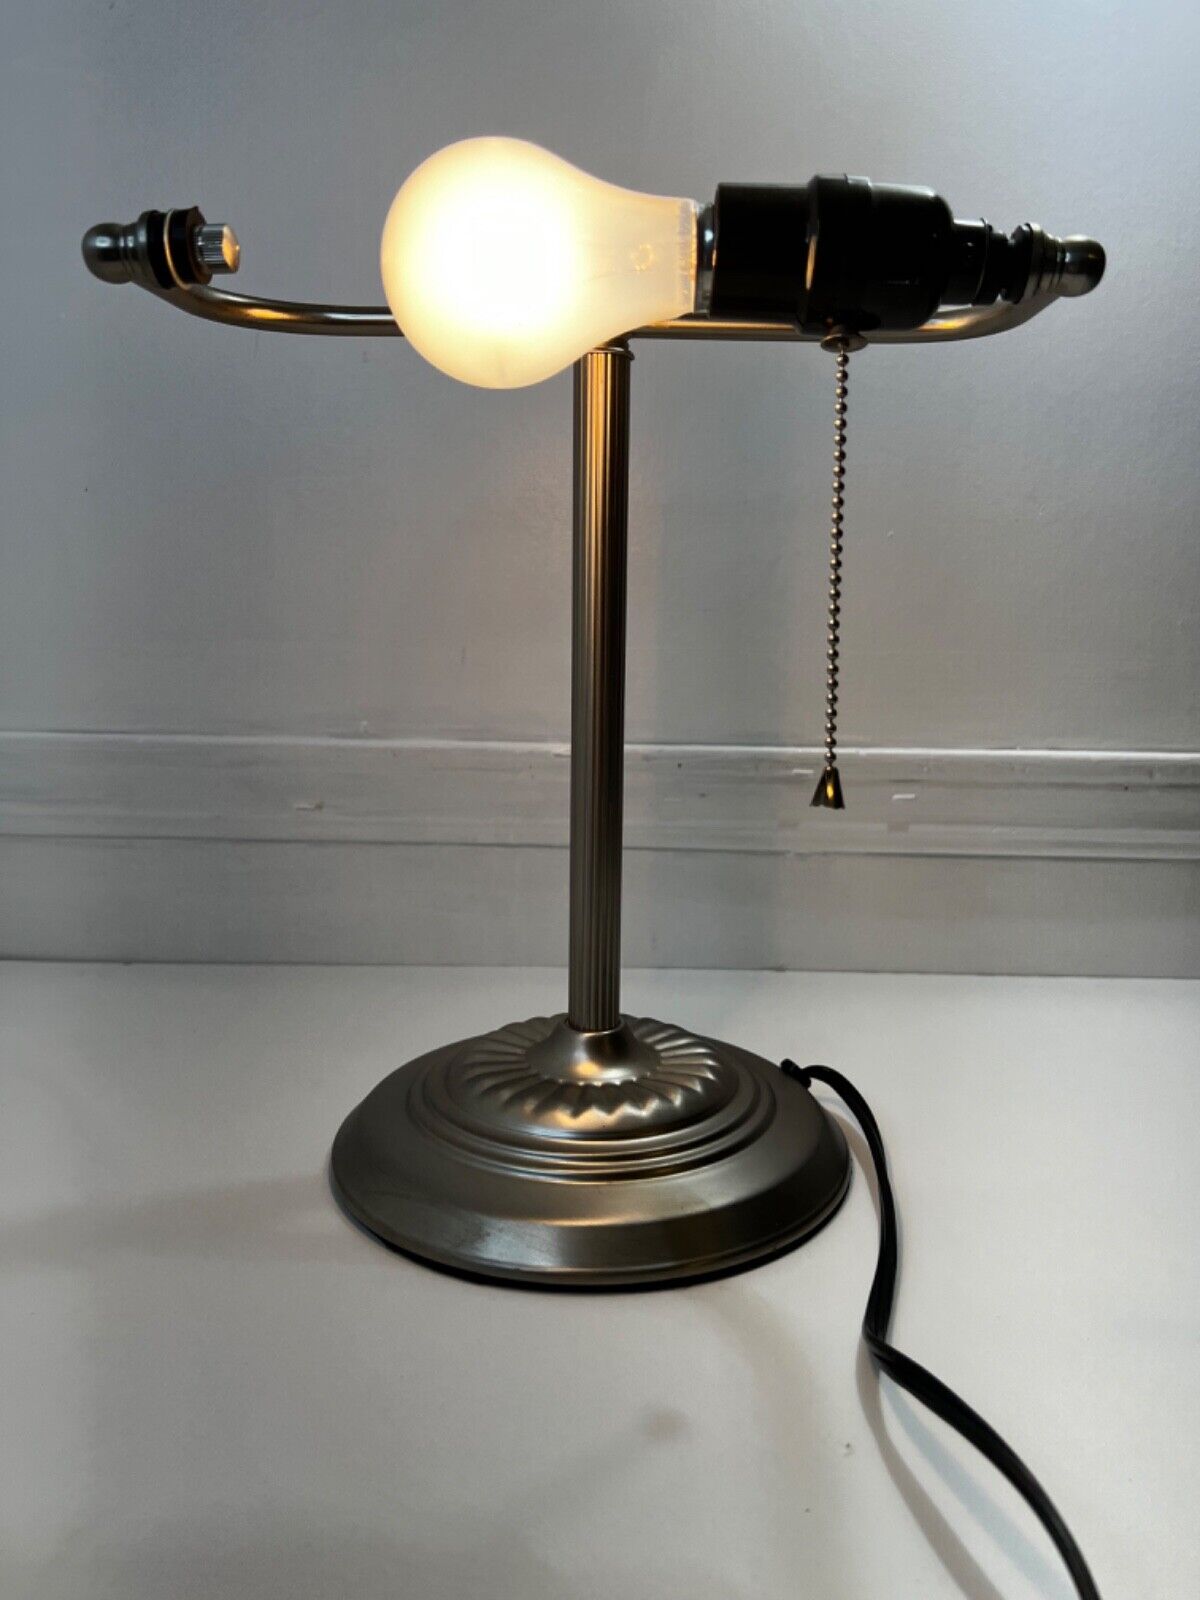 Vintage Bankers Desk Lamp Without Shade Working